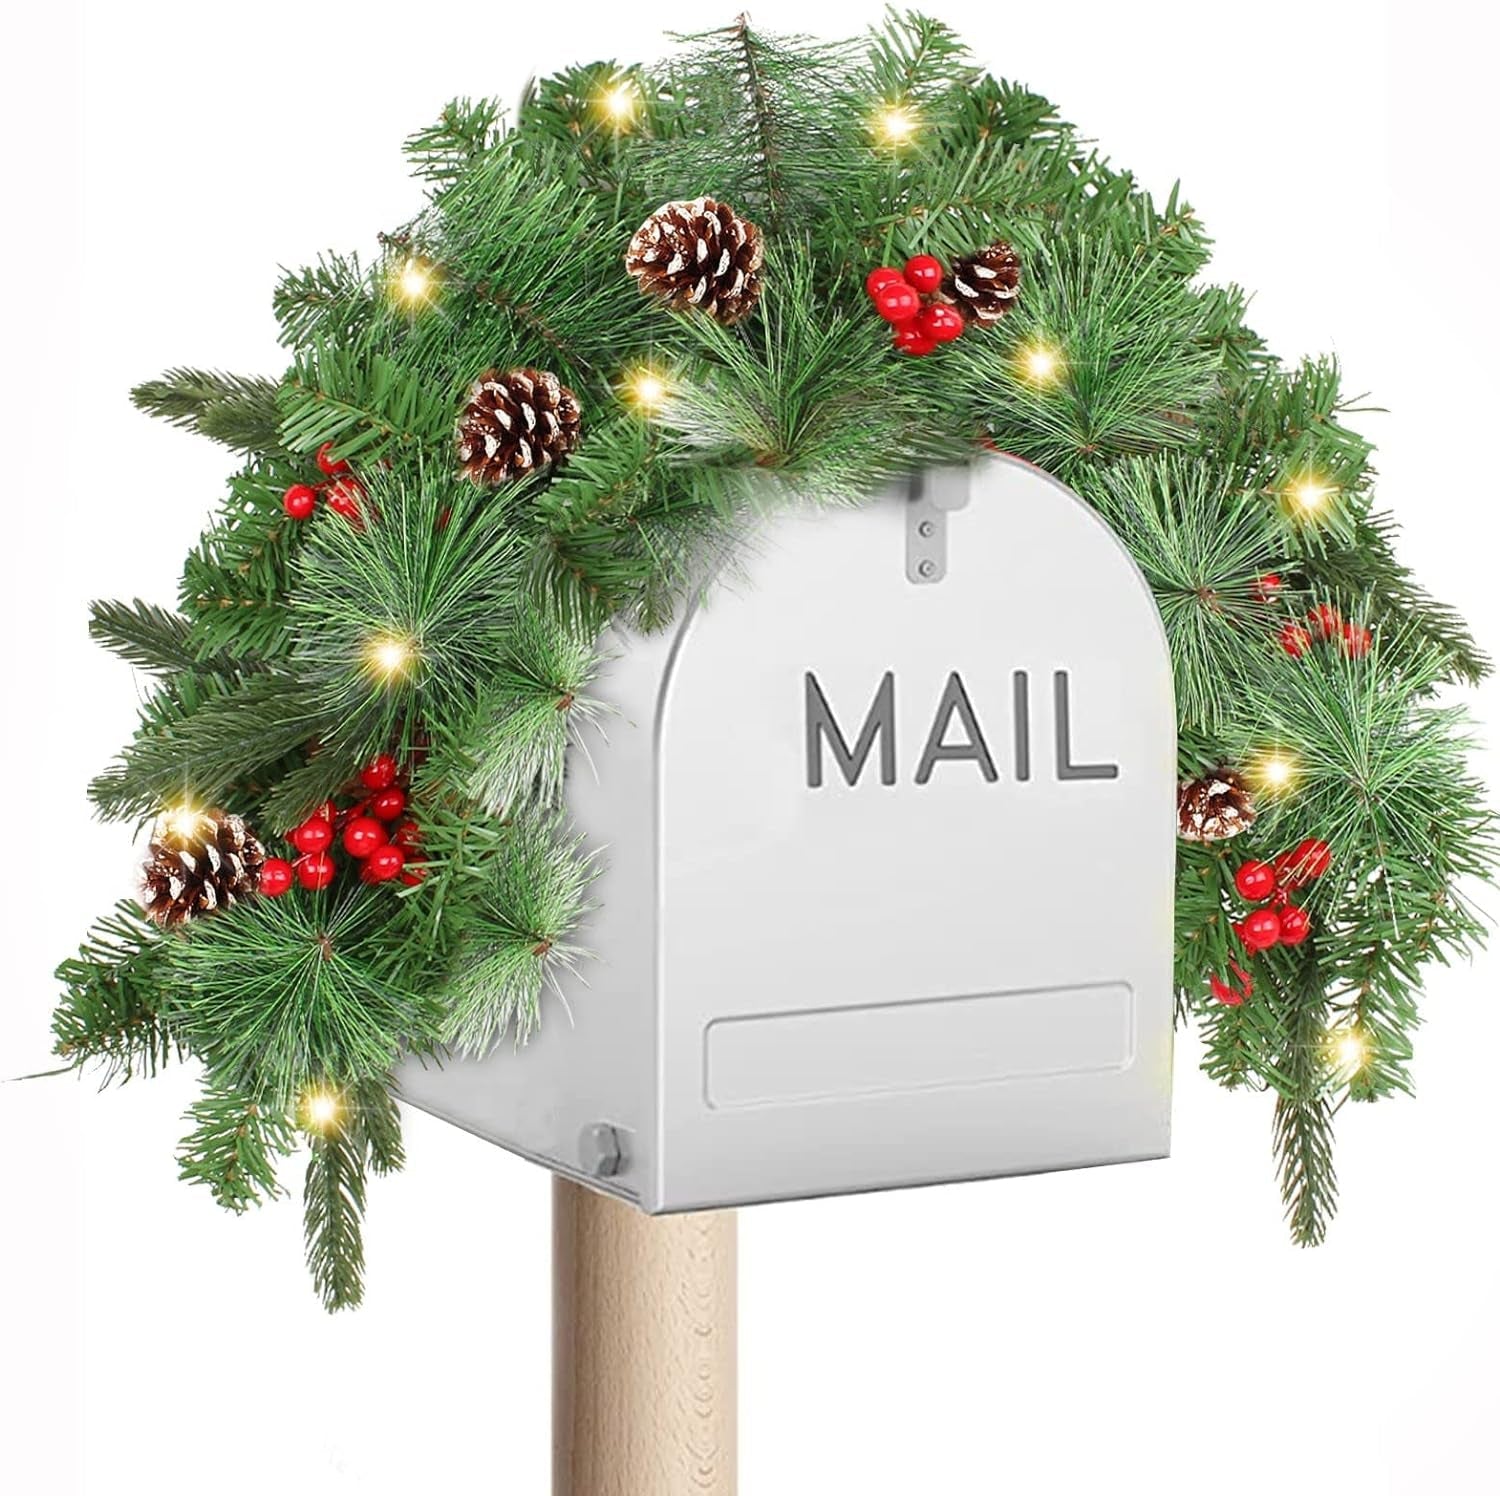 Mailbox Swag Christmas Decorations, 37 Inch Christmas Mailbox Swag with Lights Wintry Berries Xmas Mailbox Swag Garland Artificial Christmas Swag, Pine Cone and Red Berries Door Swag Home Decor